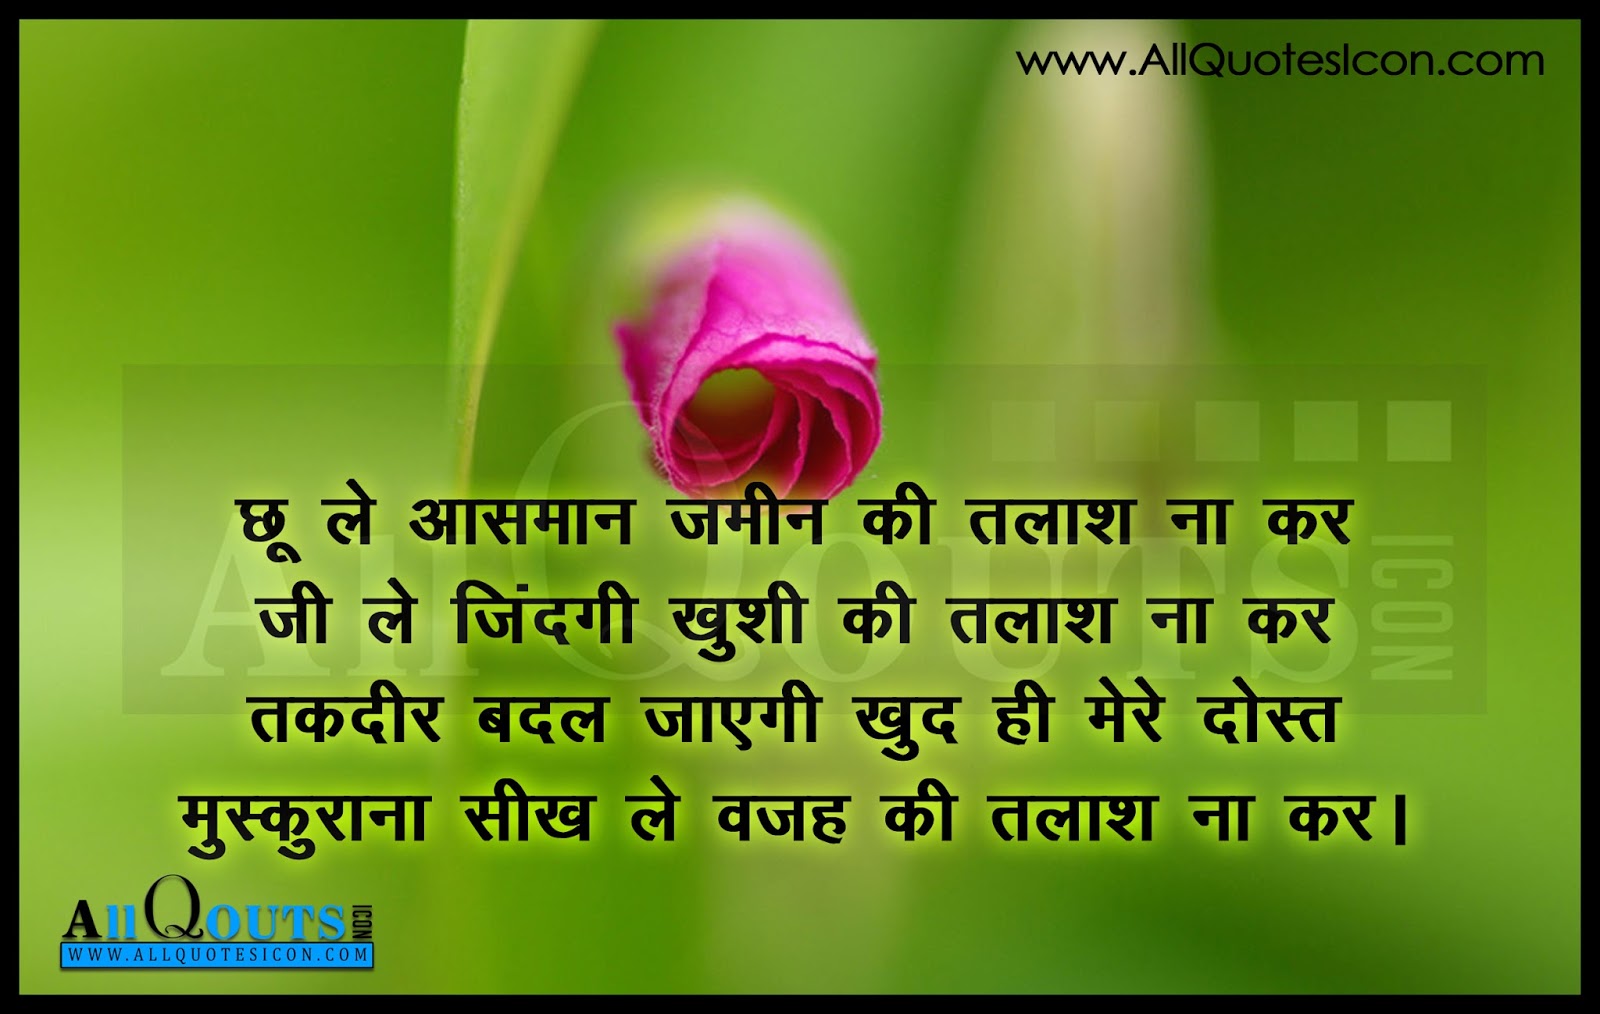 Motivational Quotes And Inspirational In Hindi - Human Action , HD Wallpaper & Backgrounds